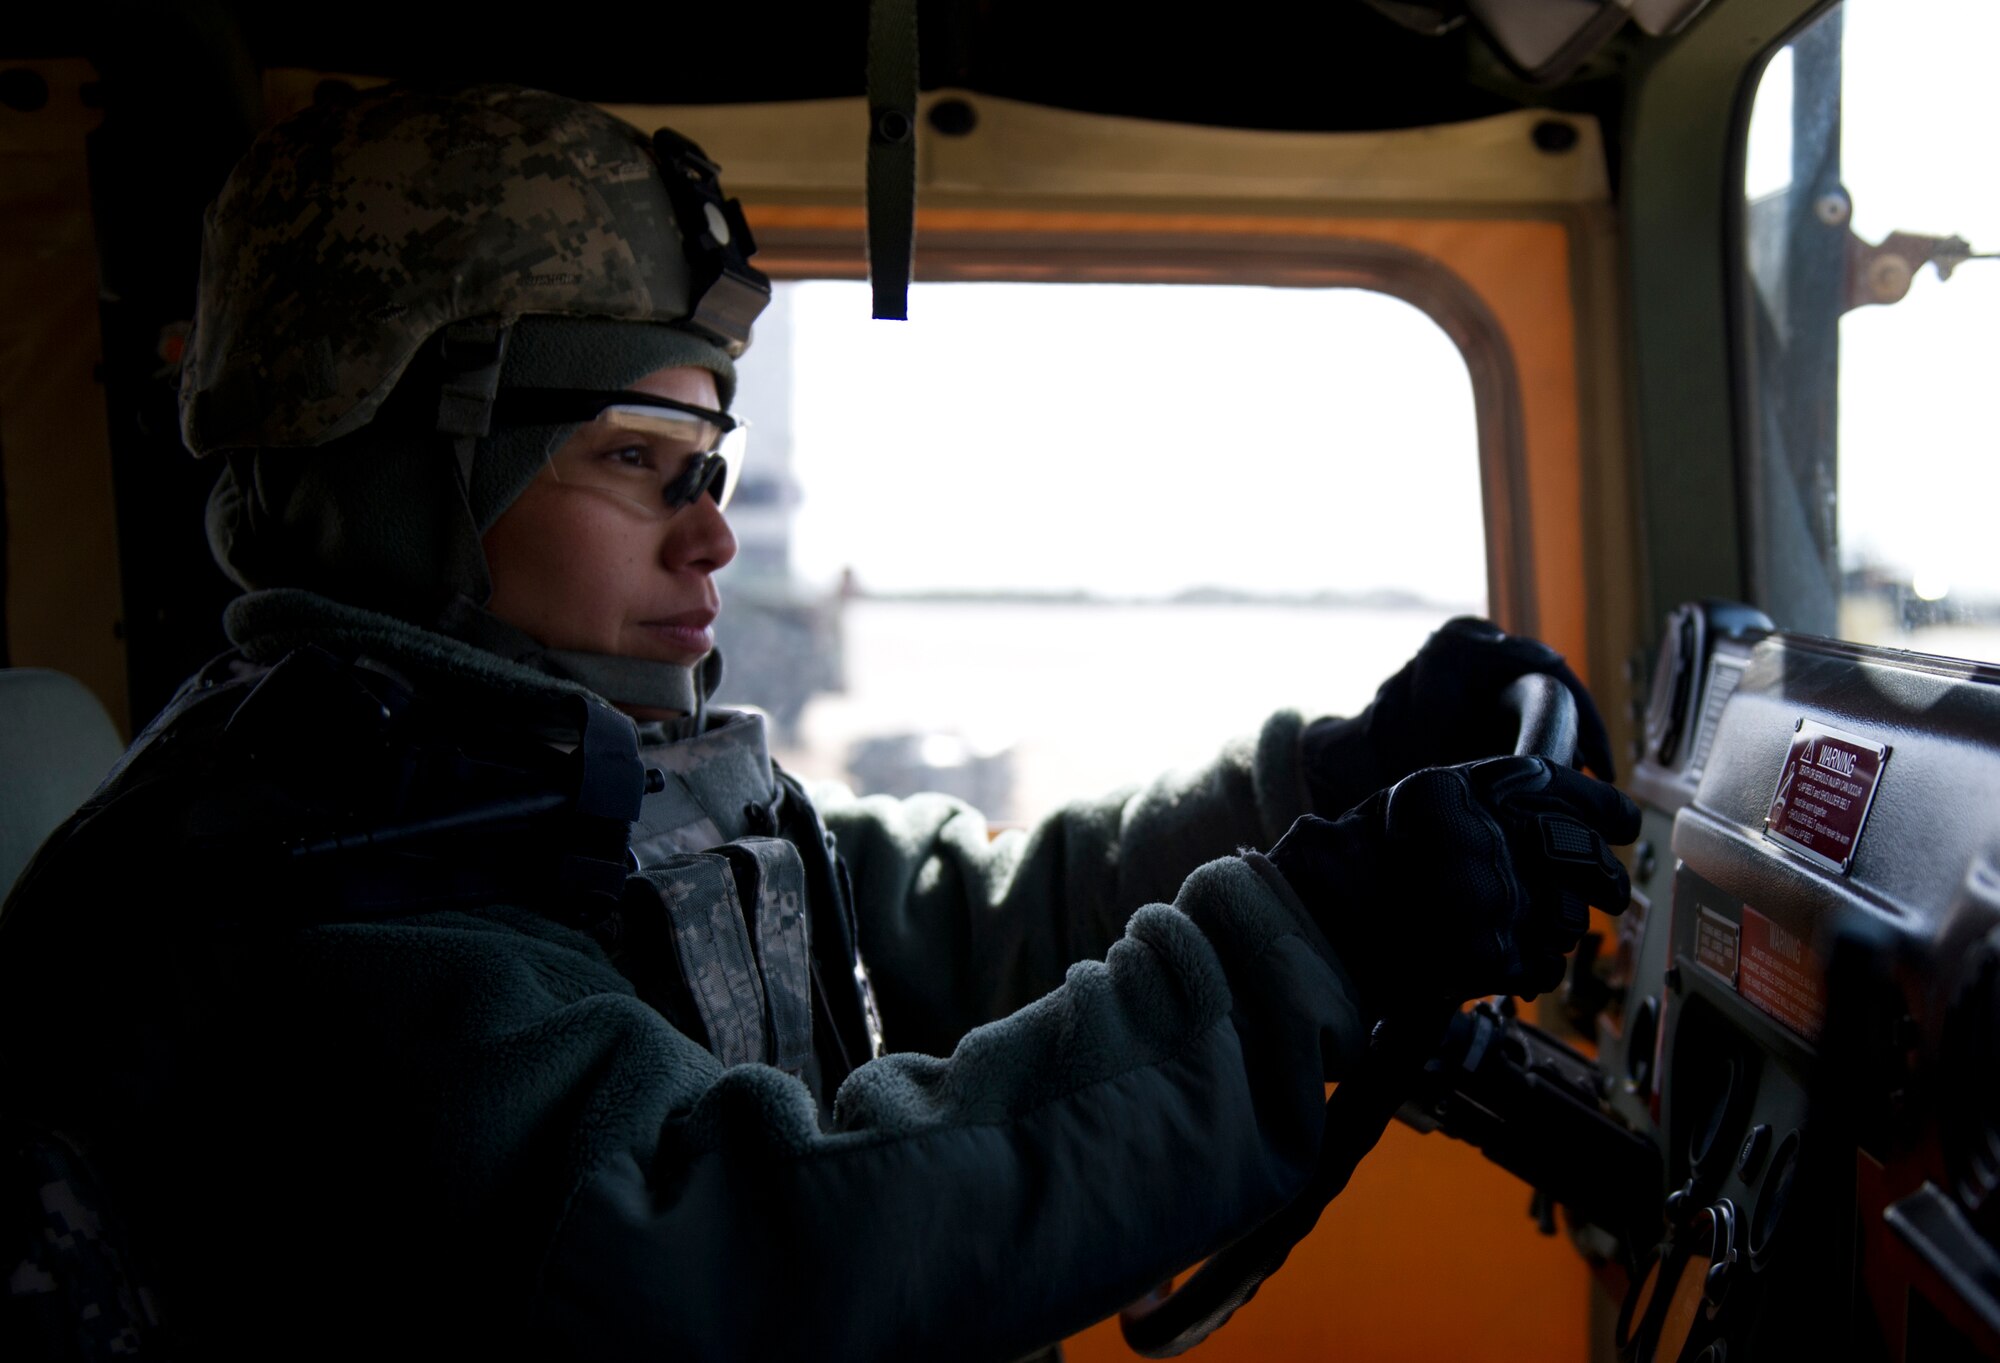 Major Maureen Trujillo, 571st Global Mobility Readiness Squadron assistant director of operations, drives a HMMWV during Eagle Flag 13-1 exercise at Joint Base McGuire-Dix-Lakehurst, N.J., March 14.  (U.S. Air Force photo by Staff Sgt. Gustavo Gonzalez)